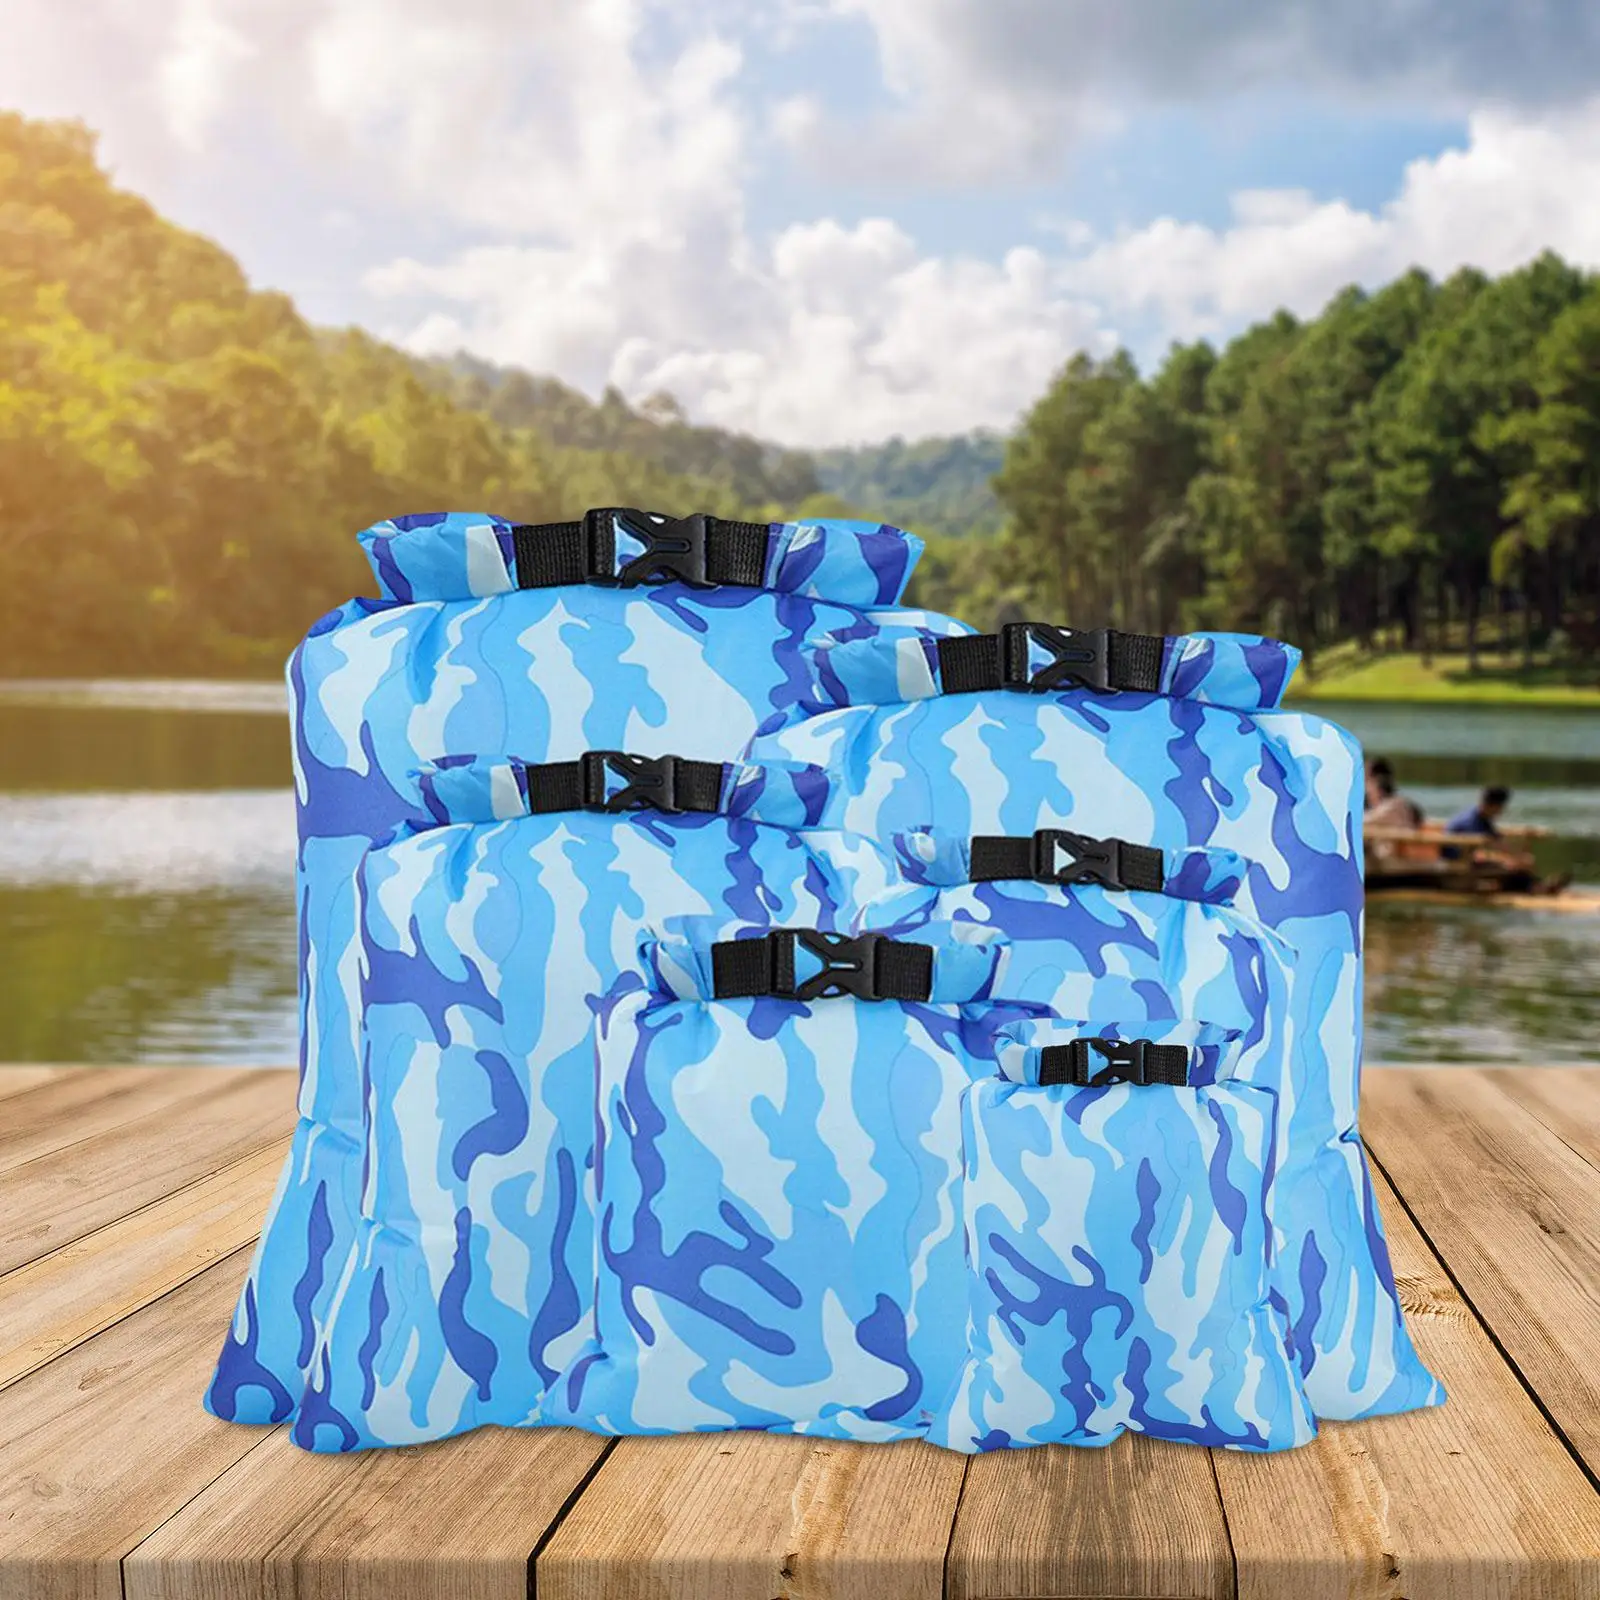 6 Pieces Waterproof Dry Bag Smooth Surface Roll Top Keeps Gear Dry Pack Durable Dry Sack for Floating Surfing Canoeing Gym Beach